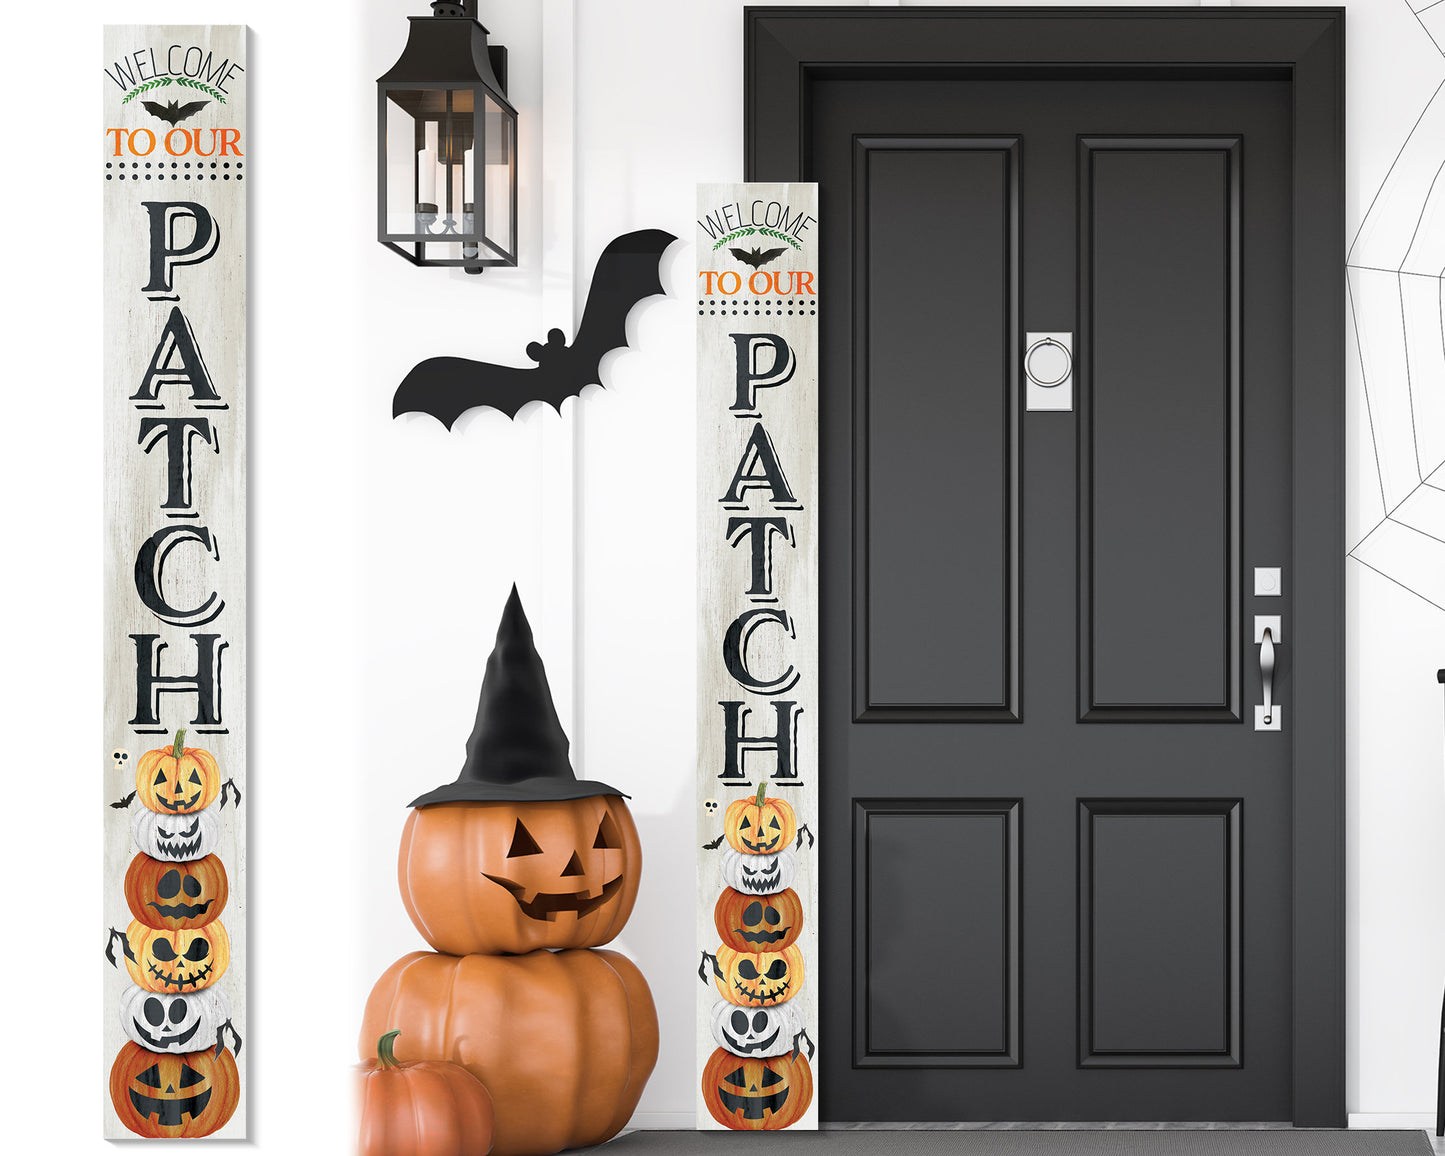 72in Wooden "Welcome to Our Patch" Halloween Porch Sign - Spooky and Charming Front Door Decor for Halloween Celebrations